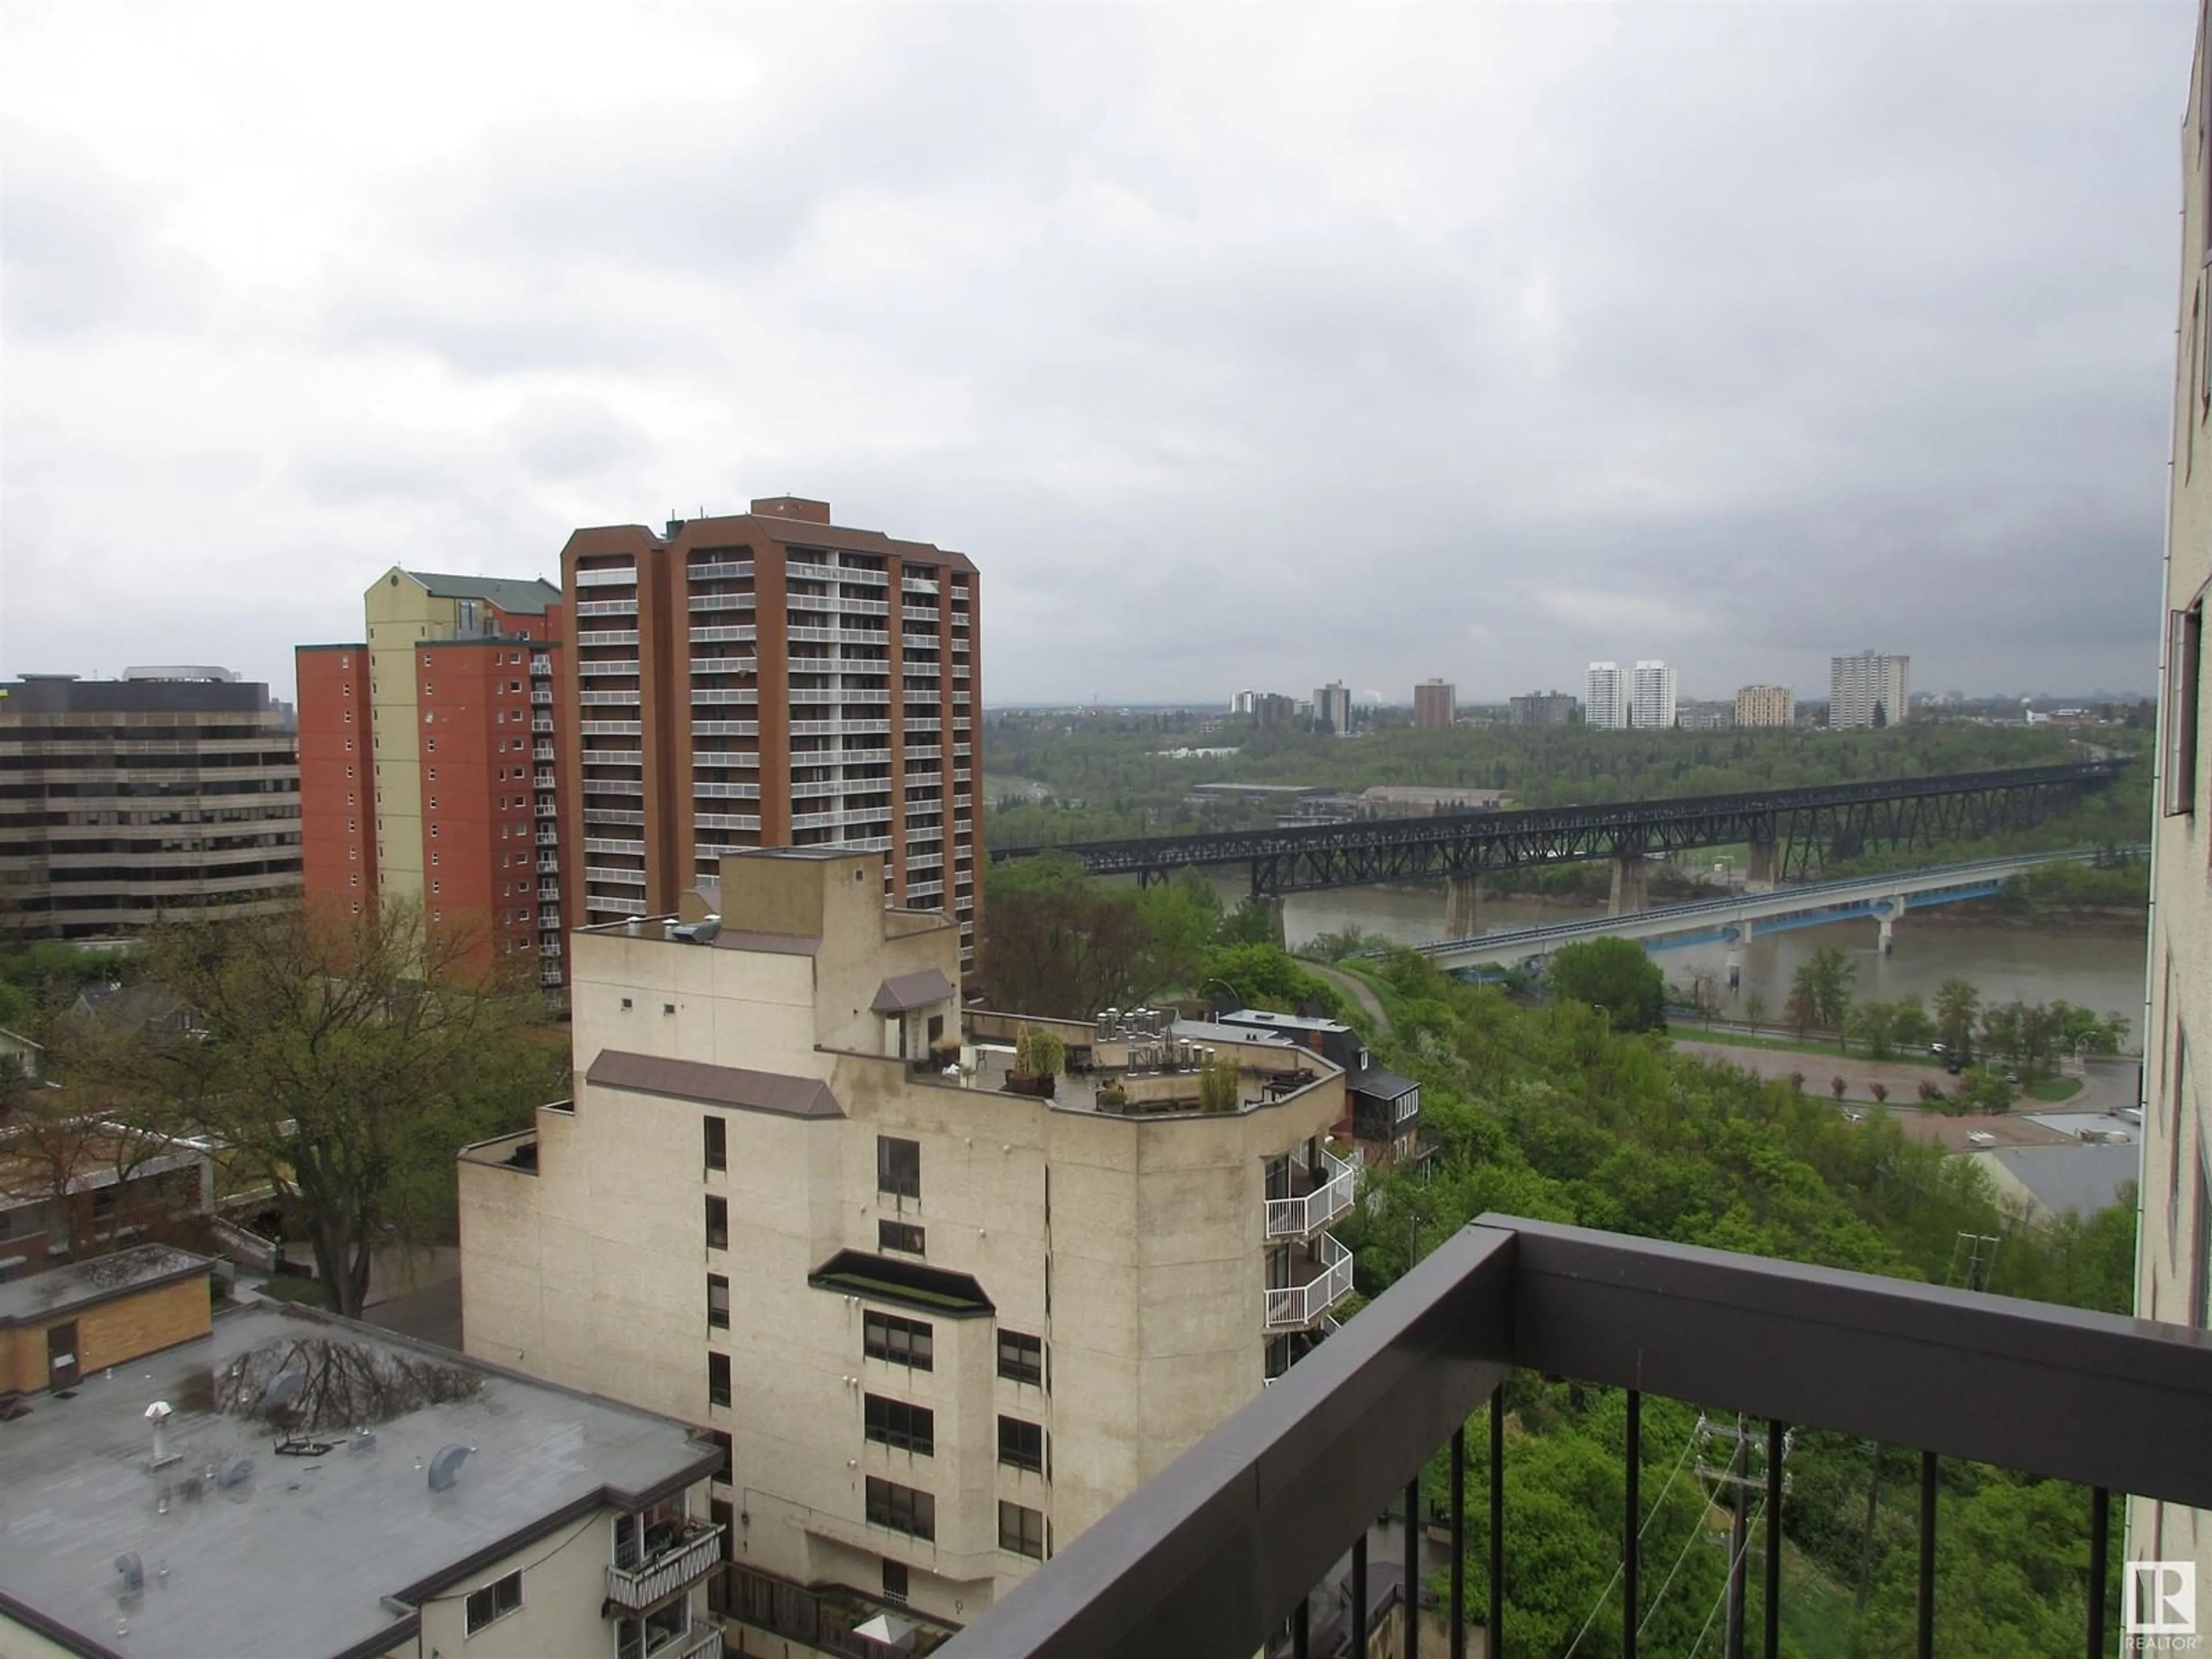 Balcony in the apartment for #1203 9737 112 ST NW, Edmonton Alberta T5K1L3